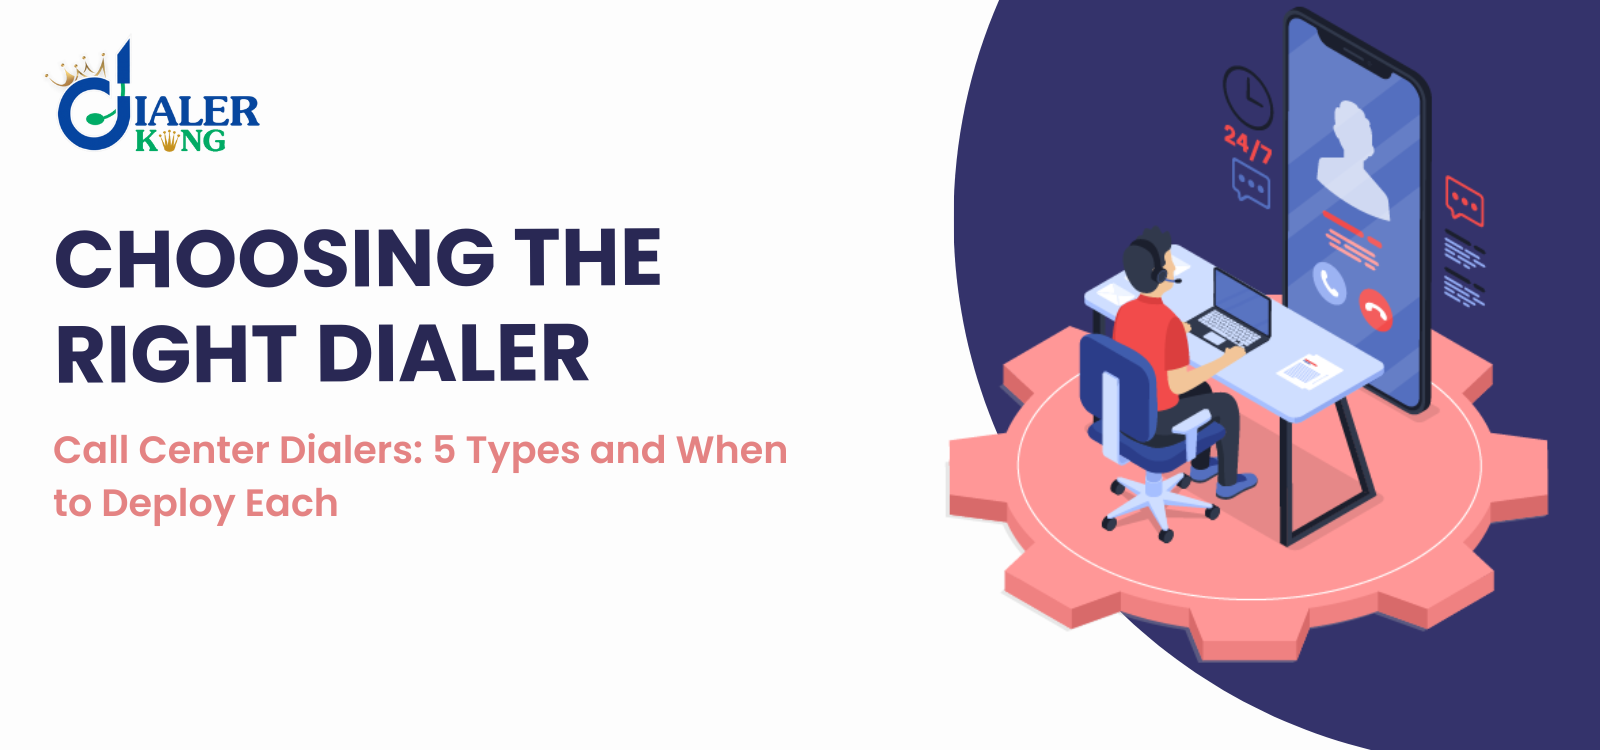 Call Center Dialers 5 Types and When to Deploy Each